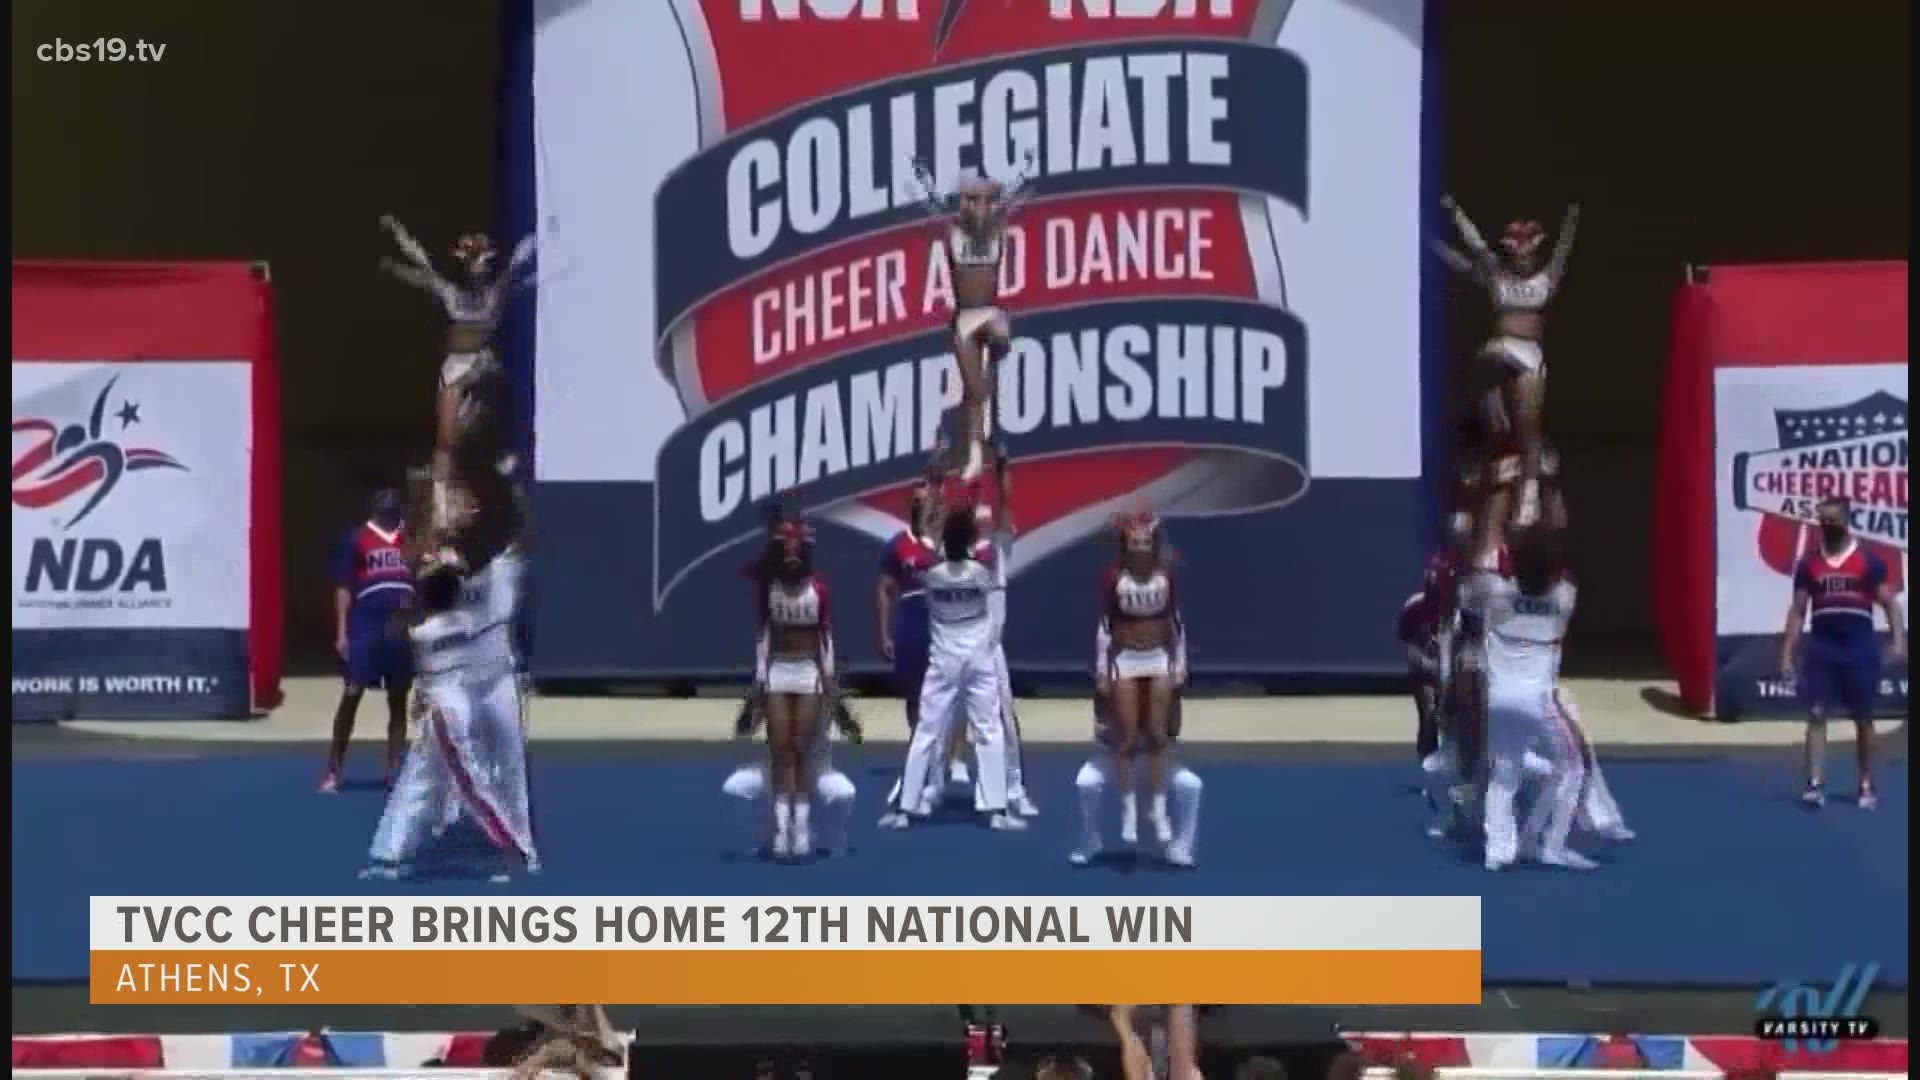 TVCC Cardinal Cheerleaders bring home 12th national title